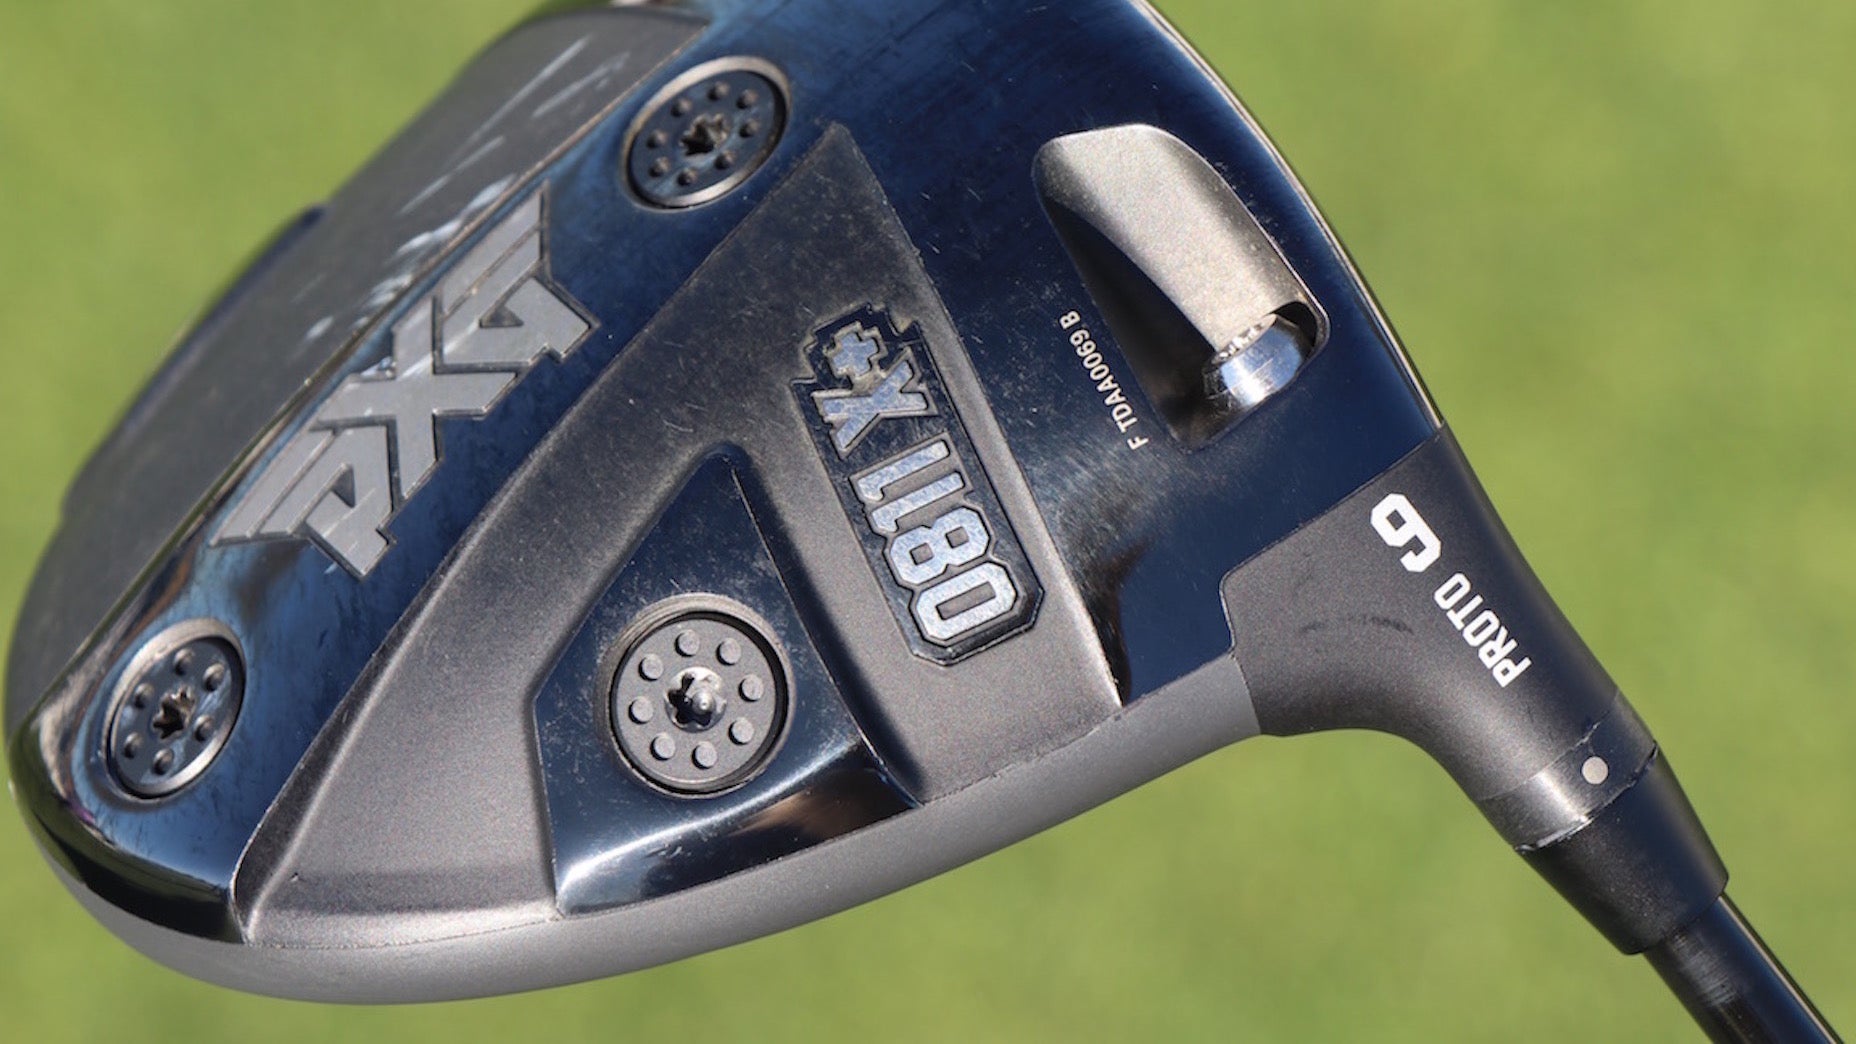 PXG releases limited-edition 0811X and 0811X+ proto drivers to the